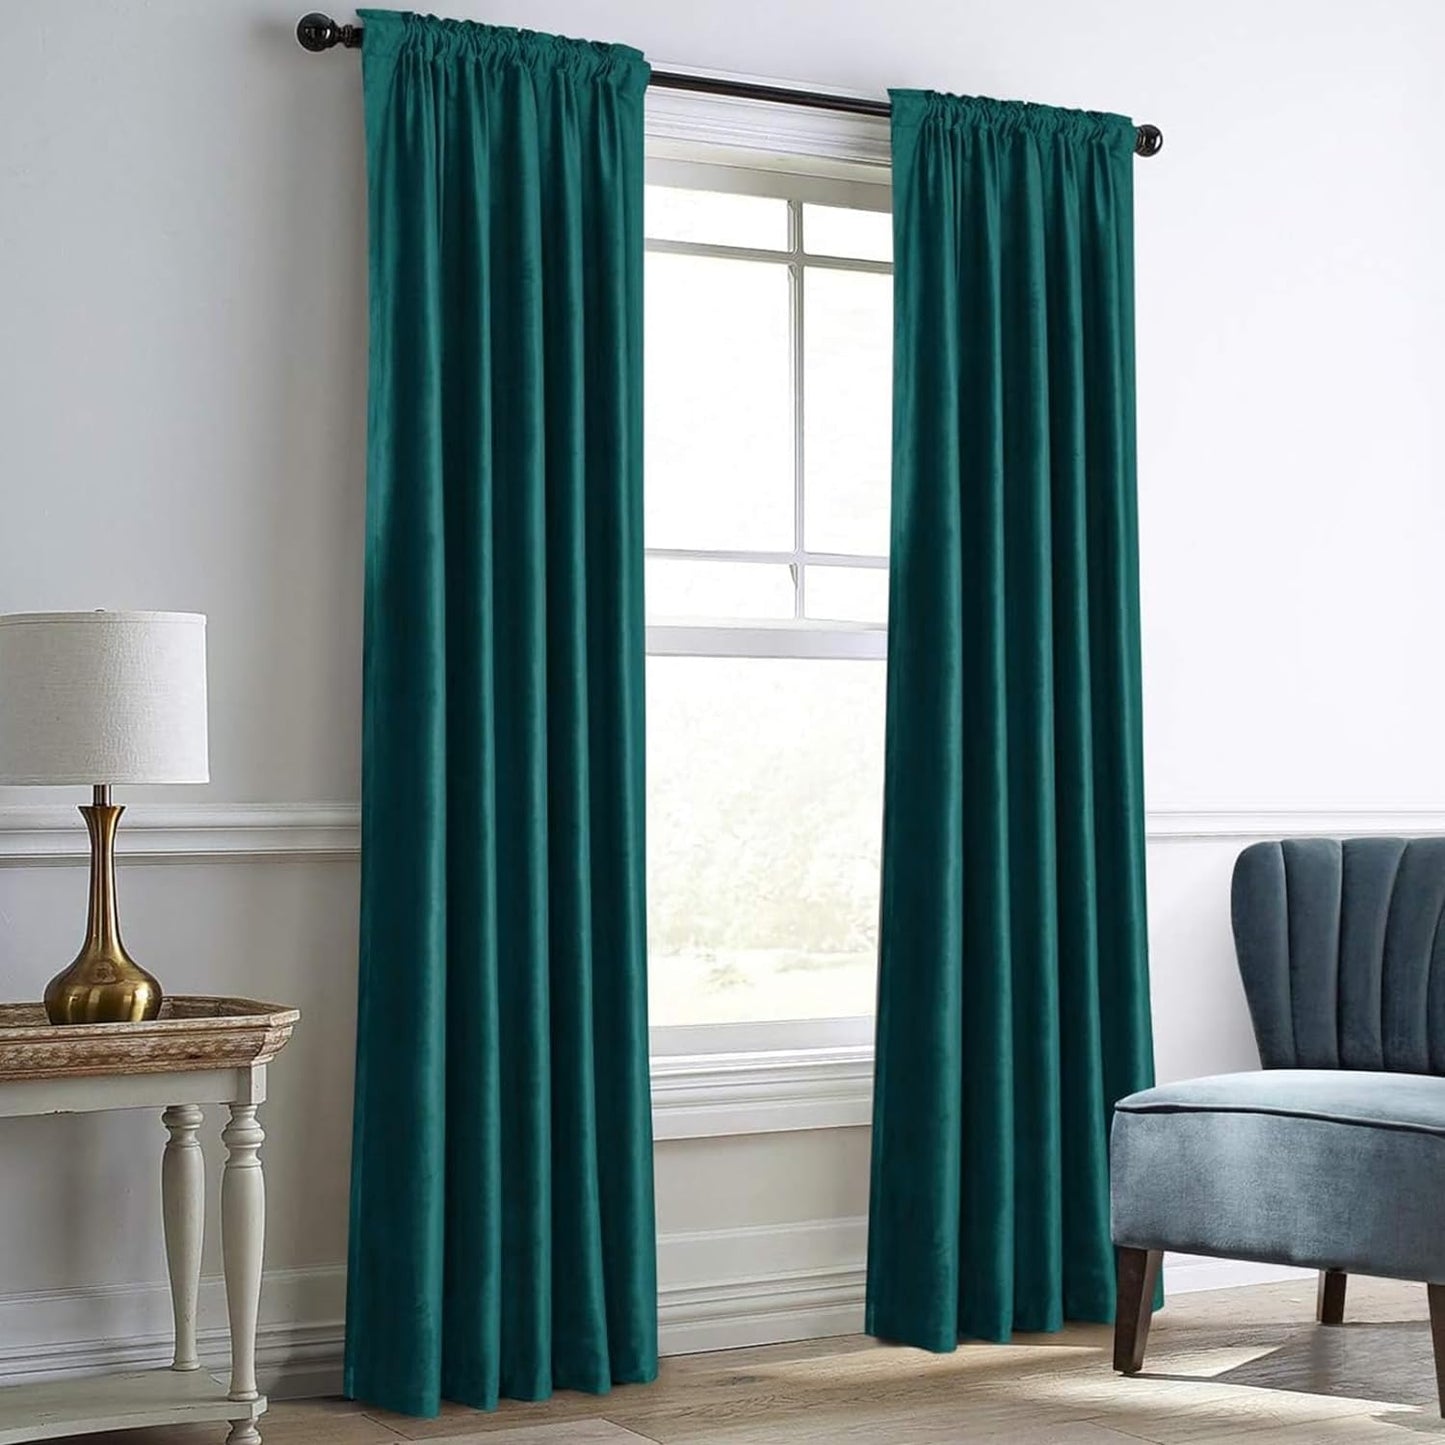 Dreaming Casa Royal Blue Velvet Room Darkening Curtains for Living Room Thermal Insulated Rod Pocket Back Tab Window Curtain for Bedroom 2 Panels 102 Inches Long, 42" W X 102" L  Dreaming Casa Teal Green 2 X (52"W X 108"L) 